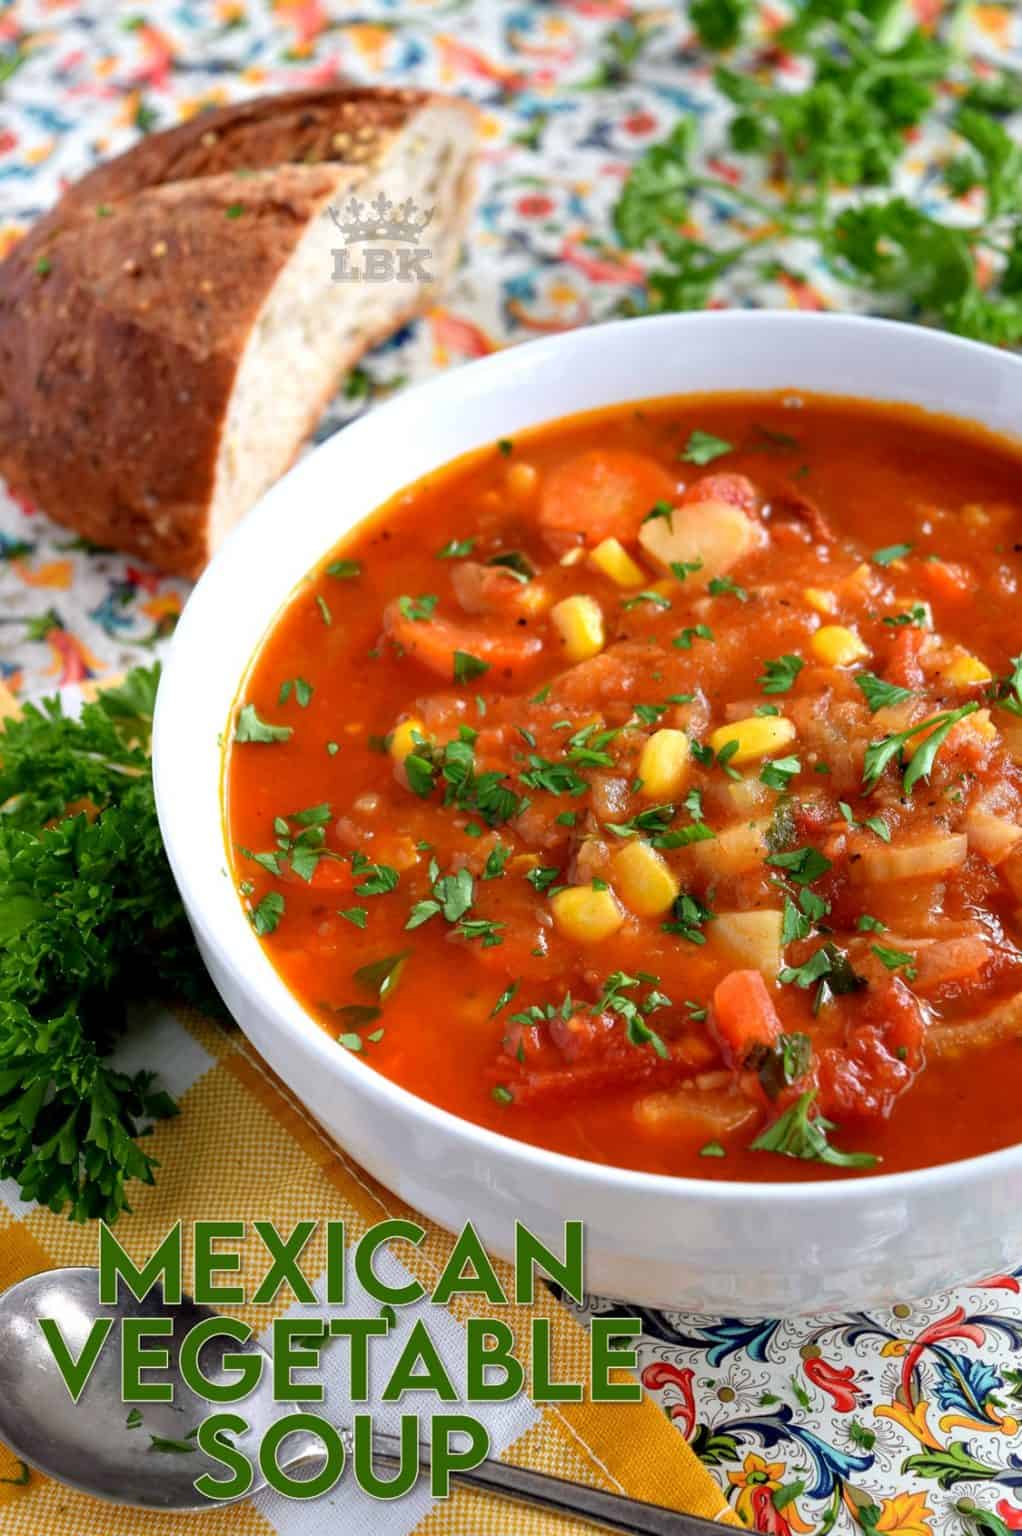 Mexican Vegetable Soup - Lord Byron's Kitchen